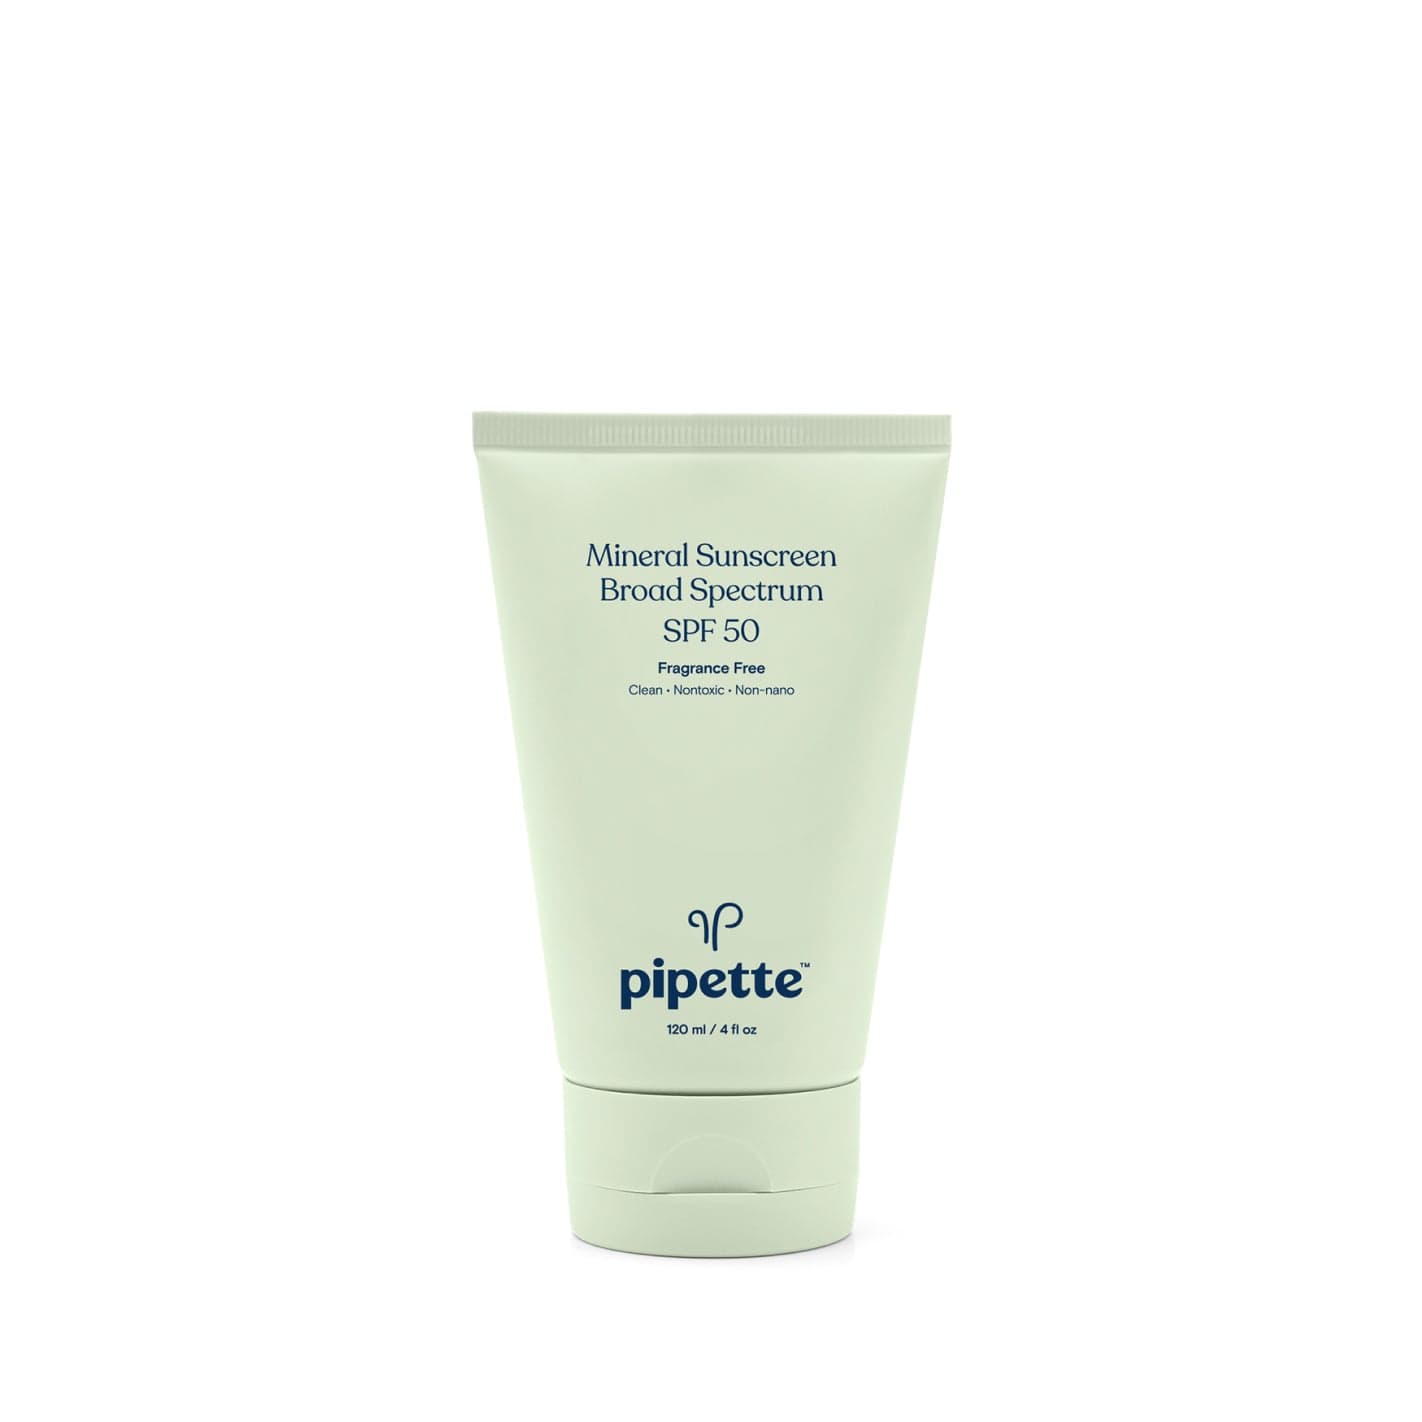 Pipette Sunscreen, Mineral, Fragrance Free, Broad Spectrum SPF 50 - 120 ml